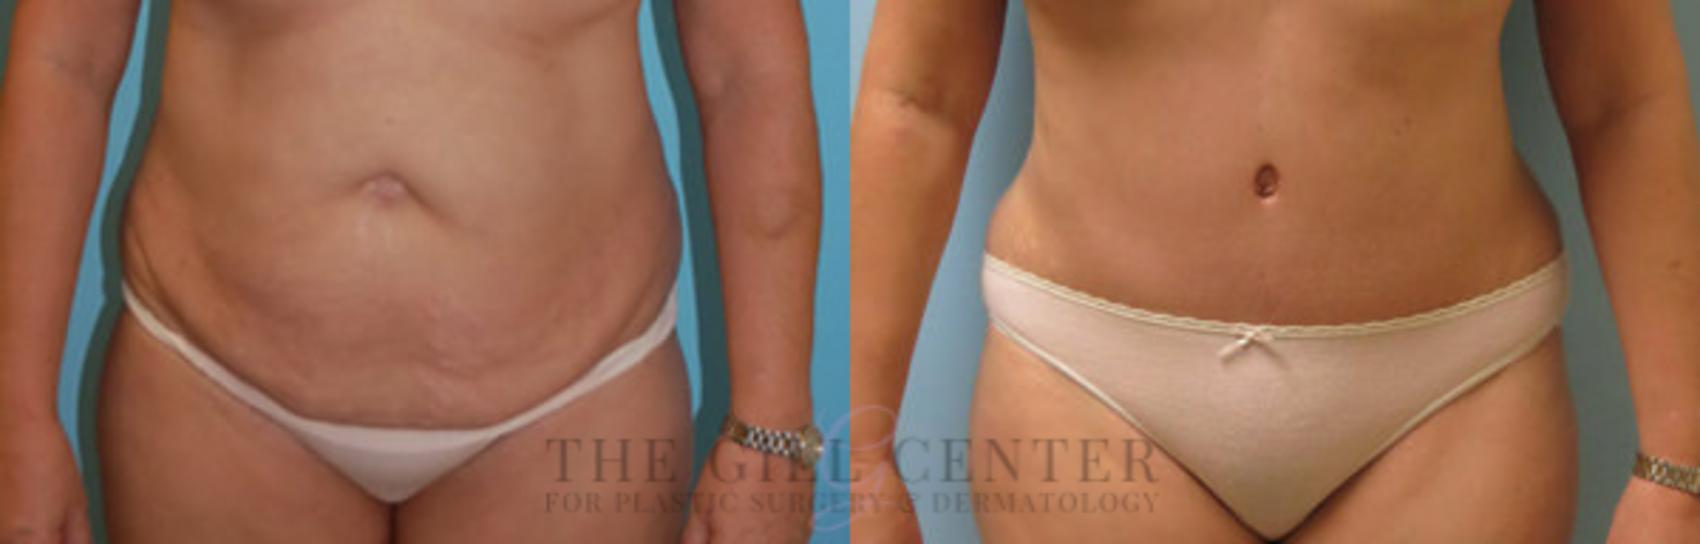 Tummy Tuck Case 250 Before & After Front | The Woodlands, TX | The Gill Center for Plastic Surgery and Dermatology